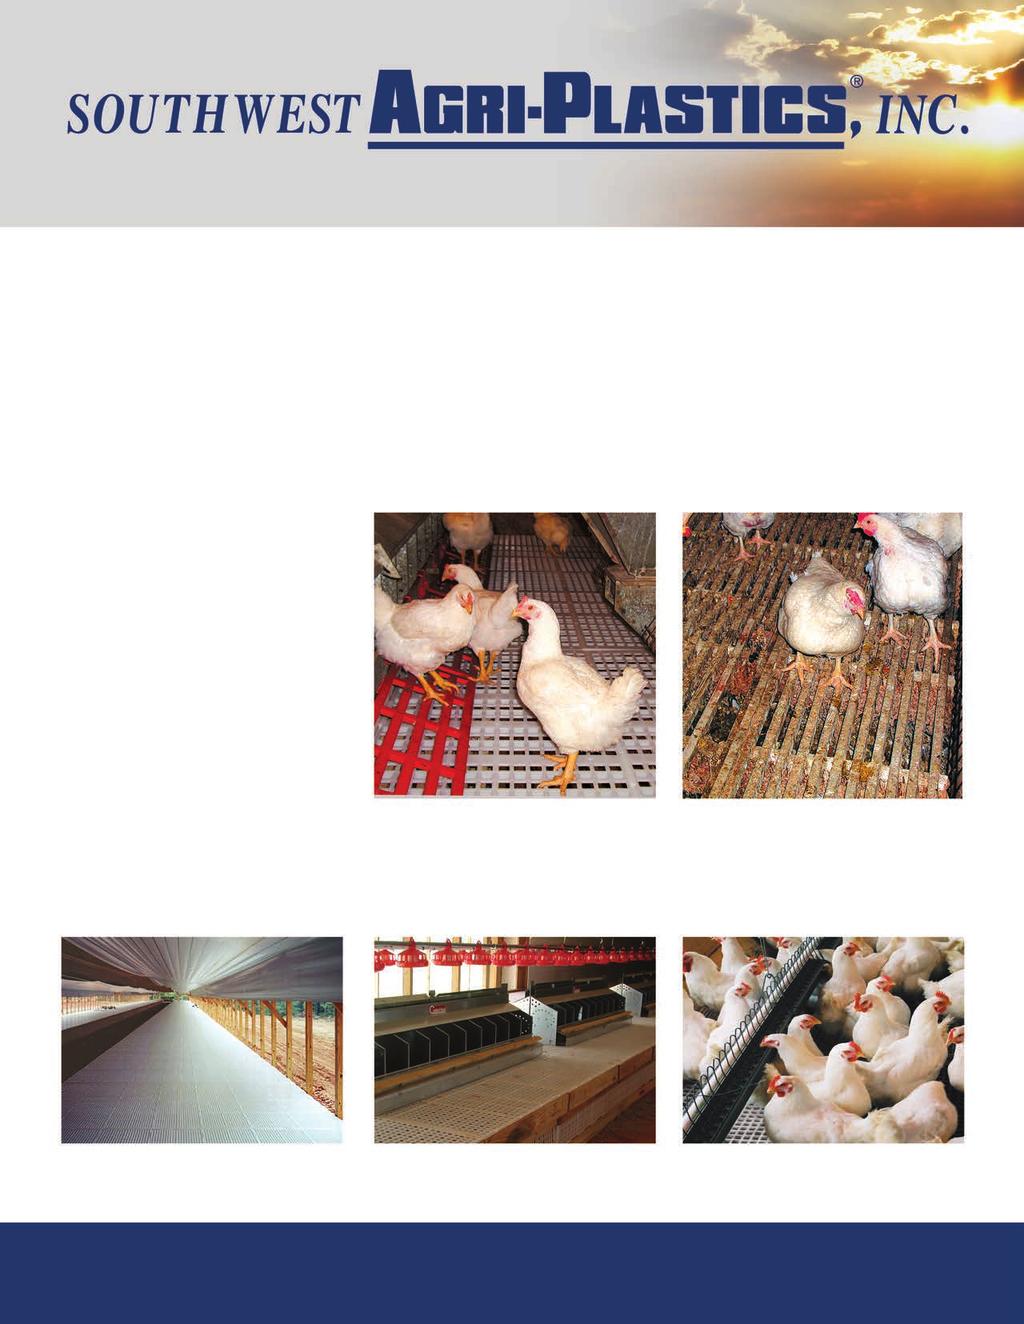 DURA-SLAT Poultry Flooring System DURA-SLAT poultry breeder slats are designed to replace wood and wire slats in poultry breeder houses.